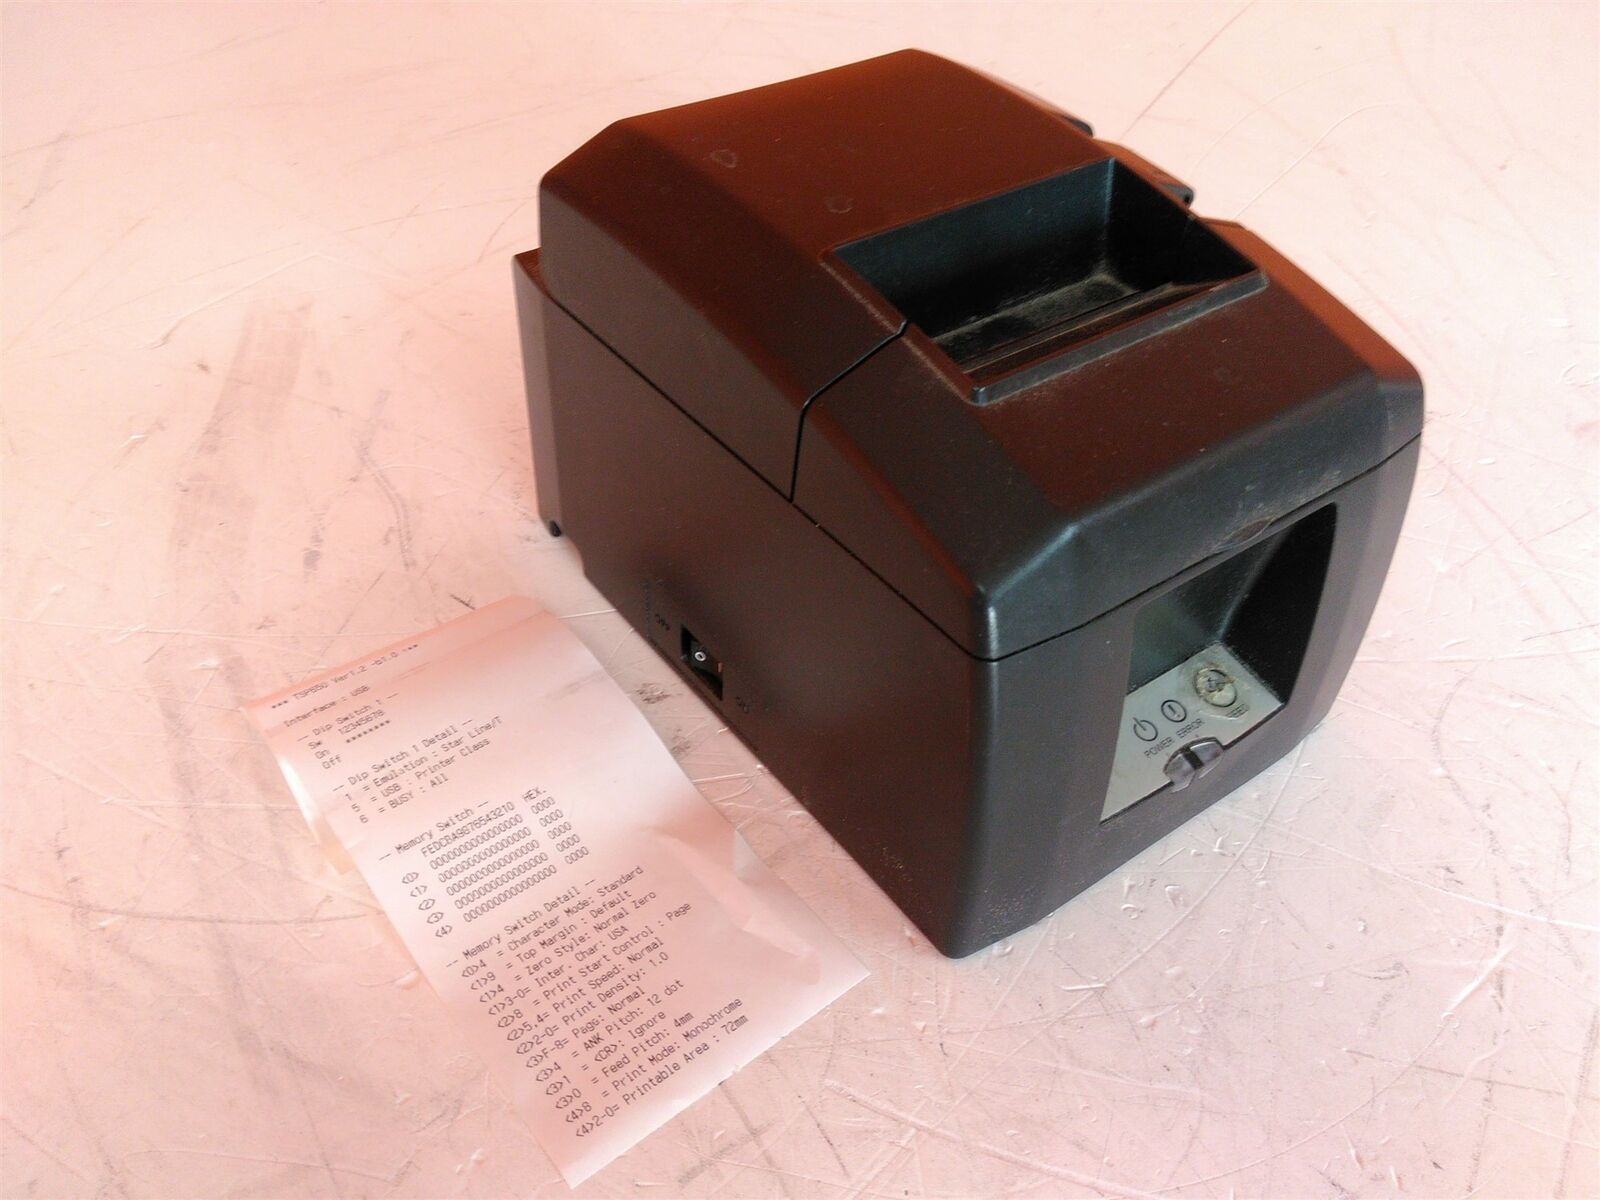 Star Micronics TSP650 POS Thermal Receipt Printer with Power Adapter